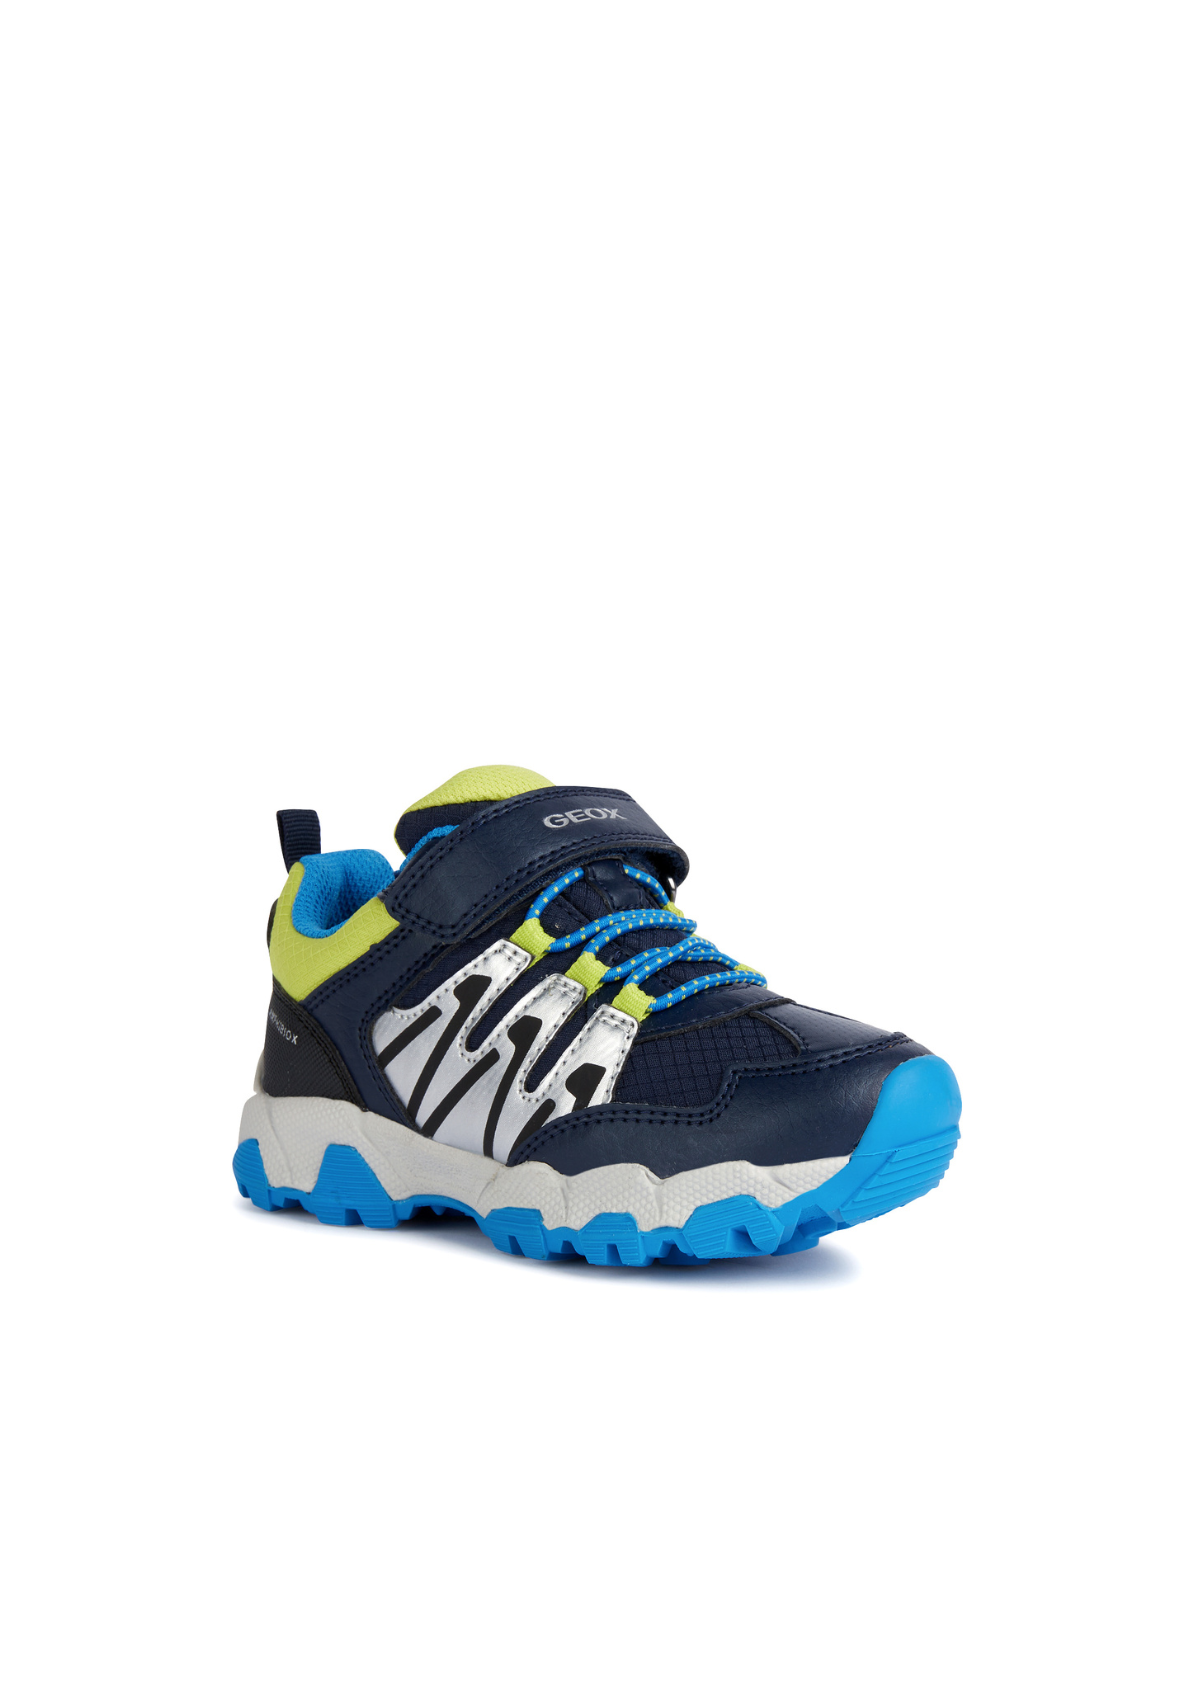 Geox Boys Trainers Magnetar Navy Lime